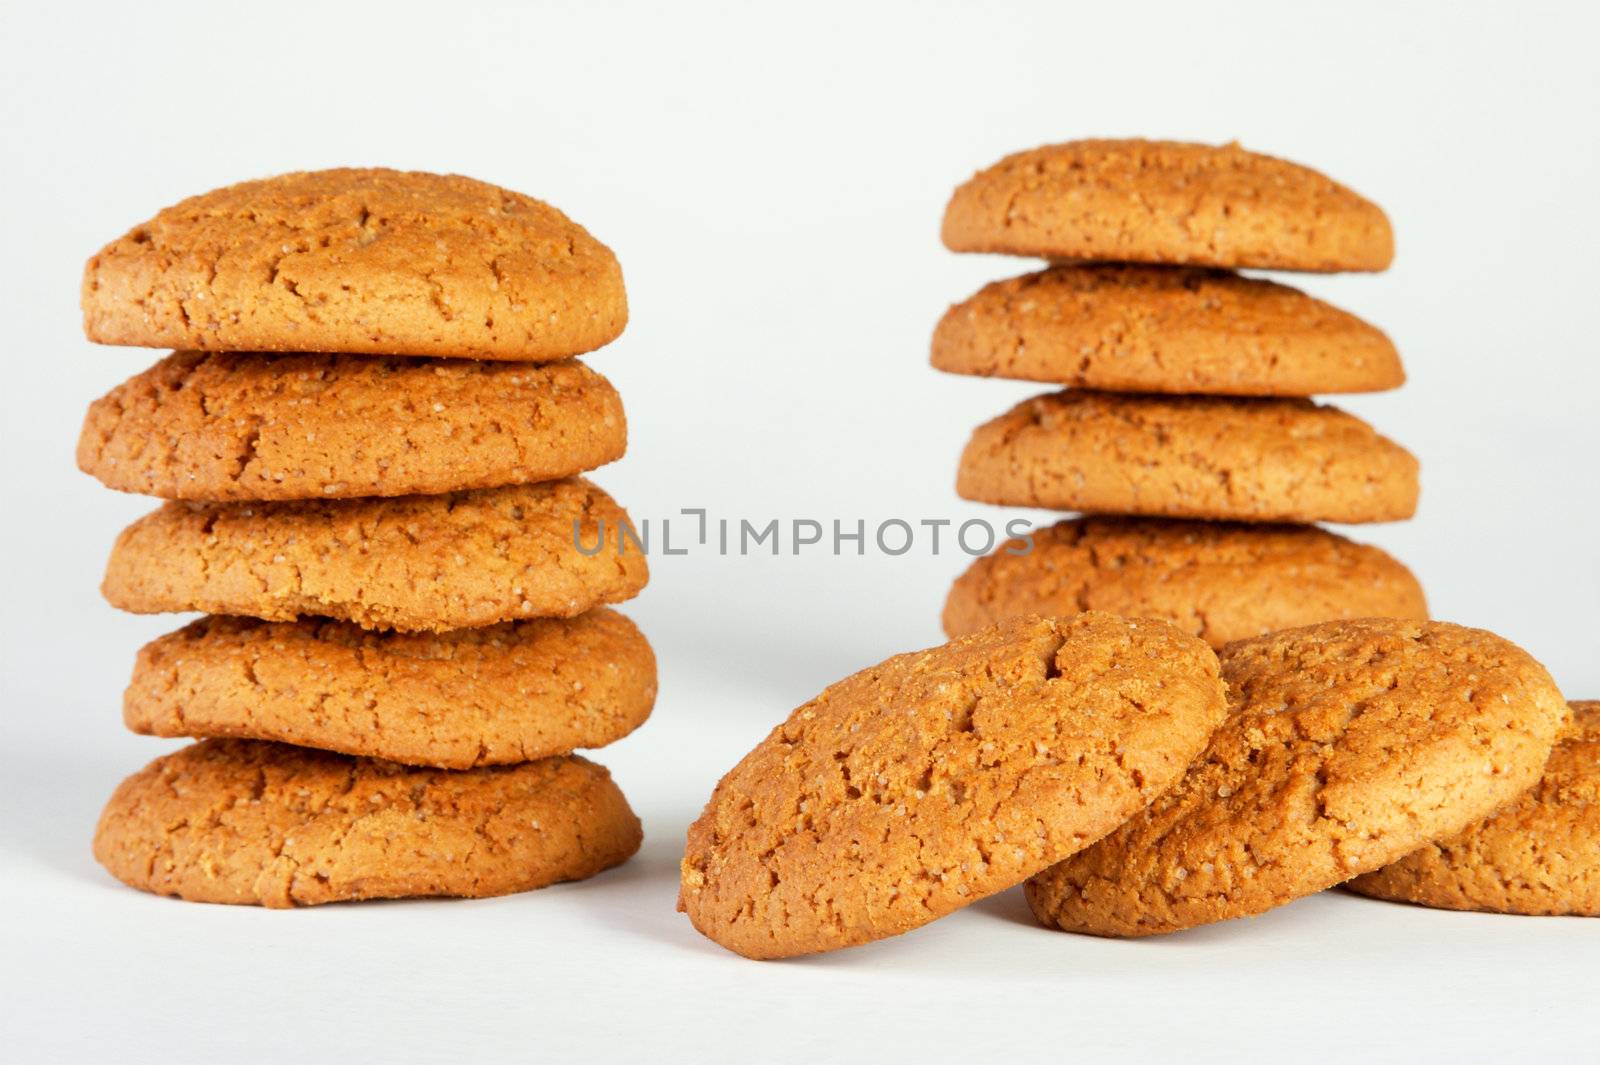 Cookies from oatmeal very tasty and useful to an organism